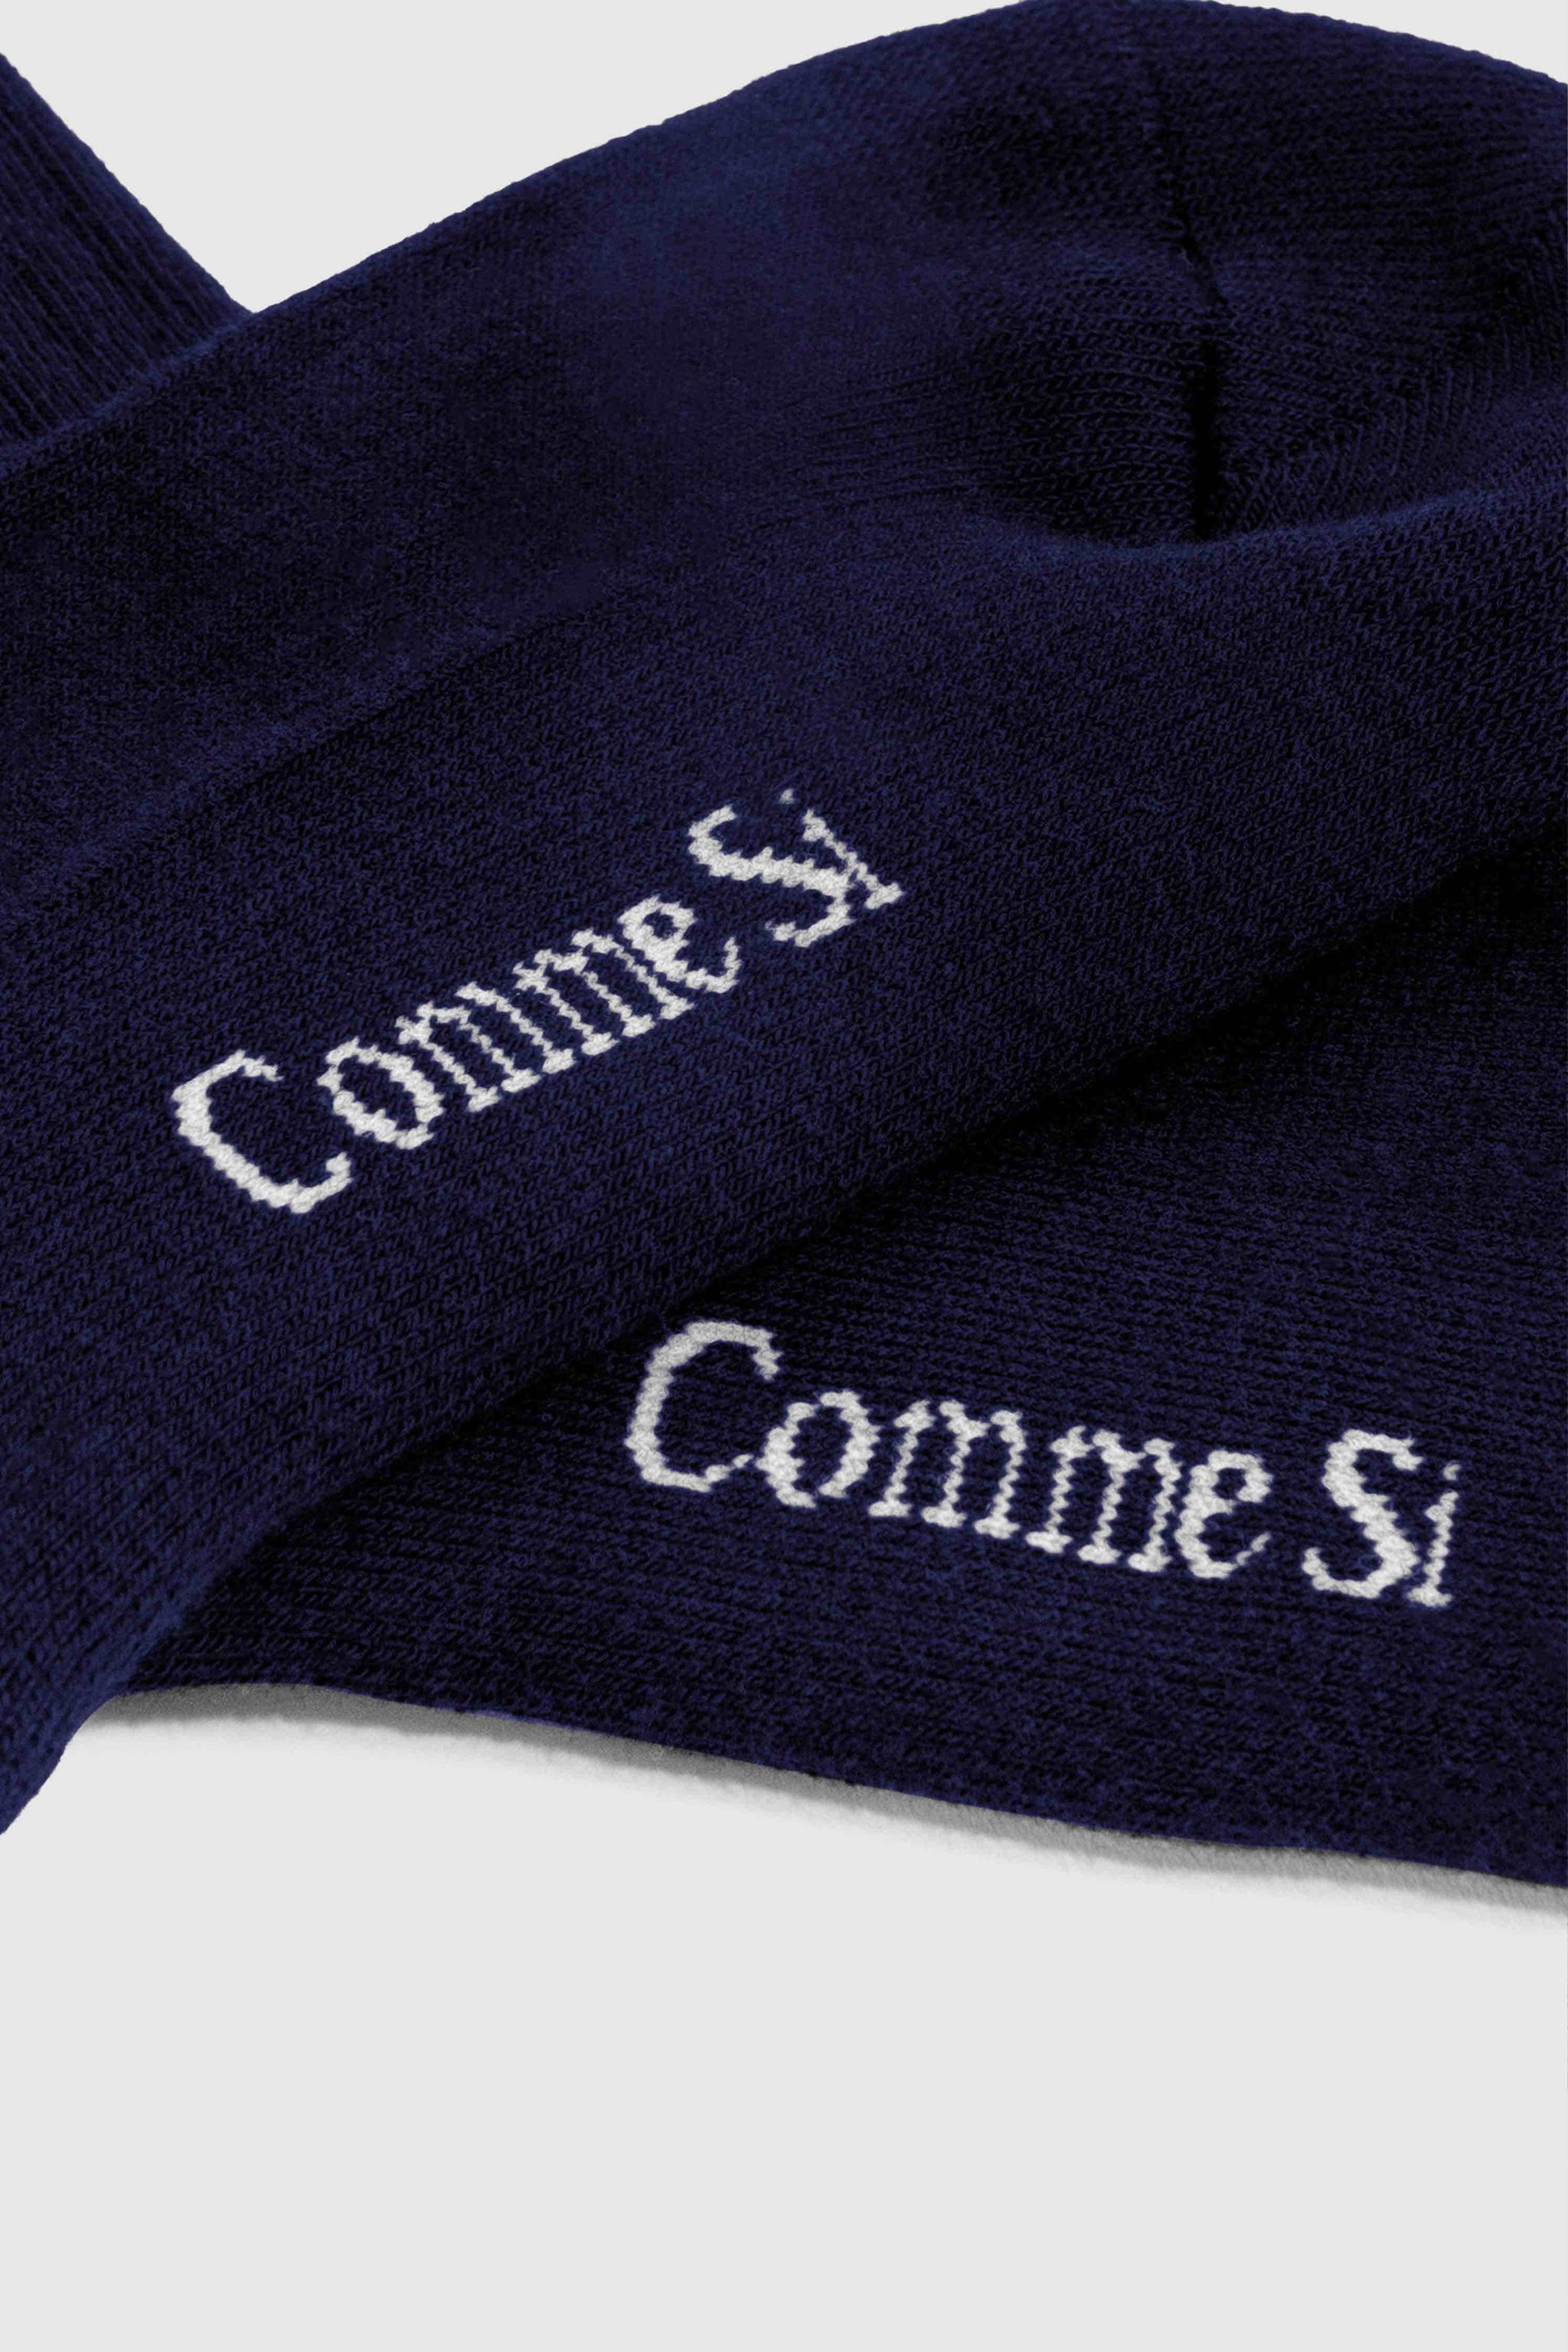 Footbed Detail, The Everyday Sock in Navy, made with Organic Egyptian Cotton, by Comme Si